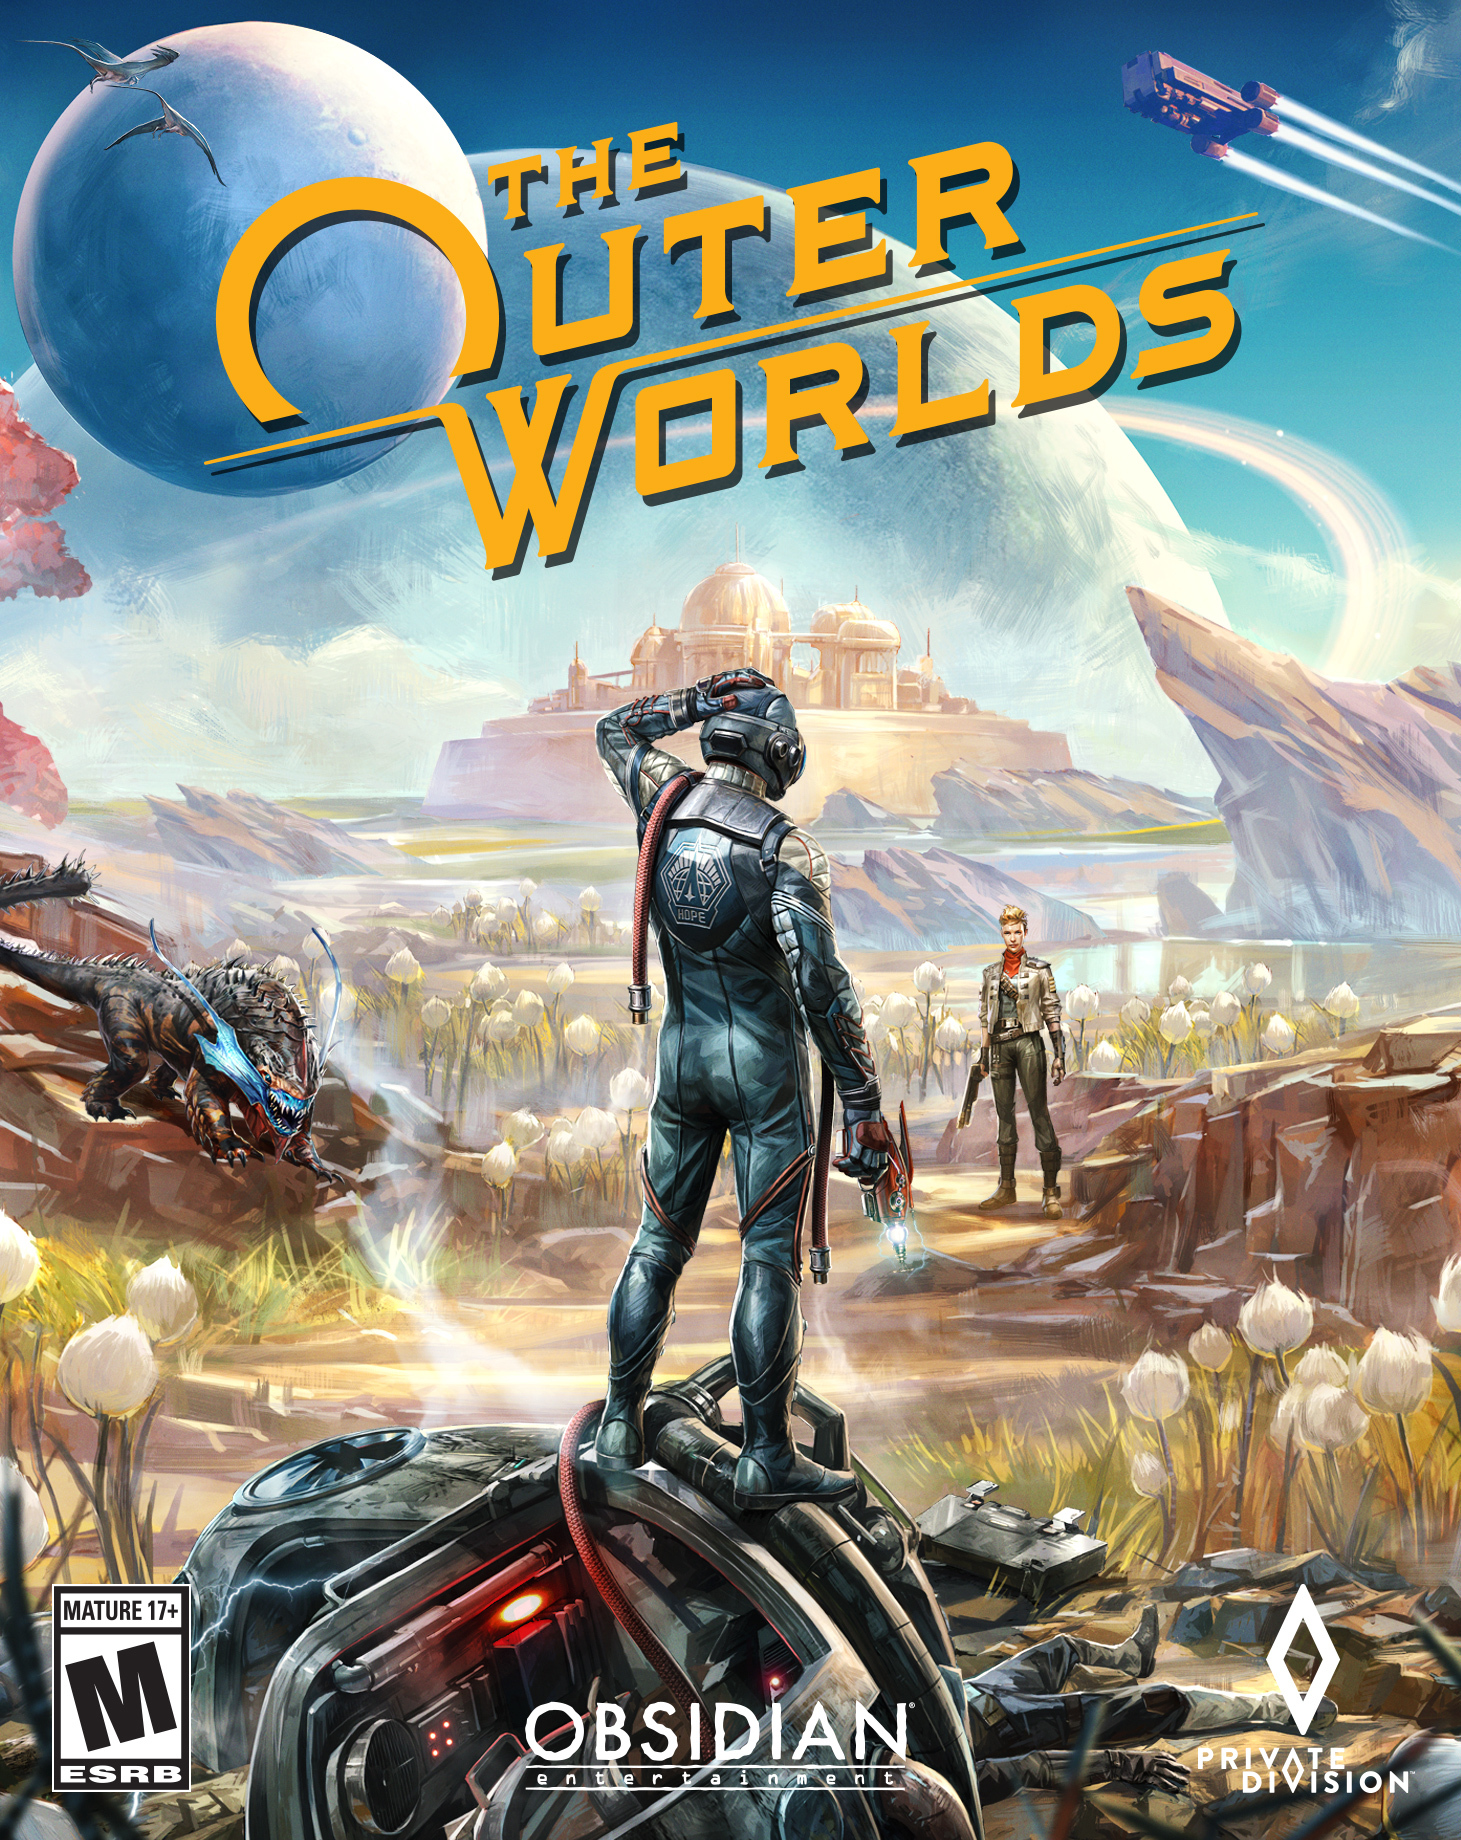 The Outer Worlds, Software